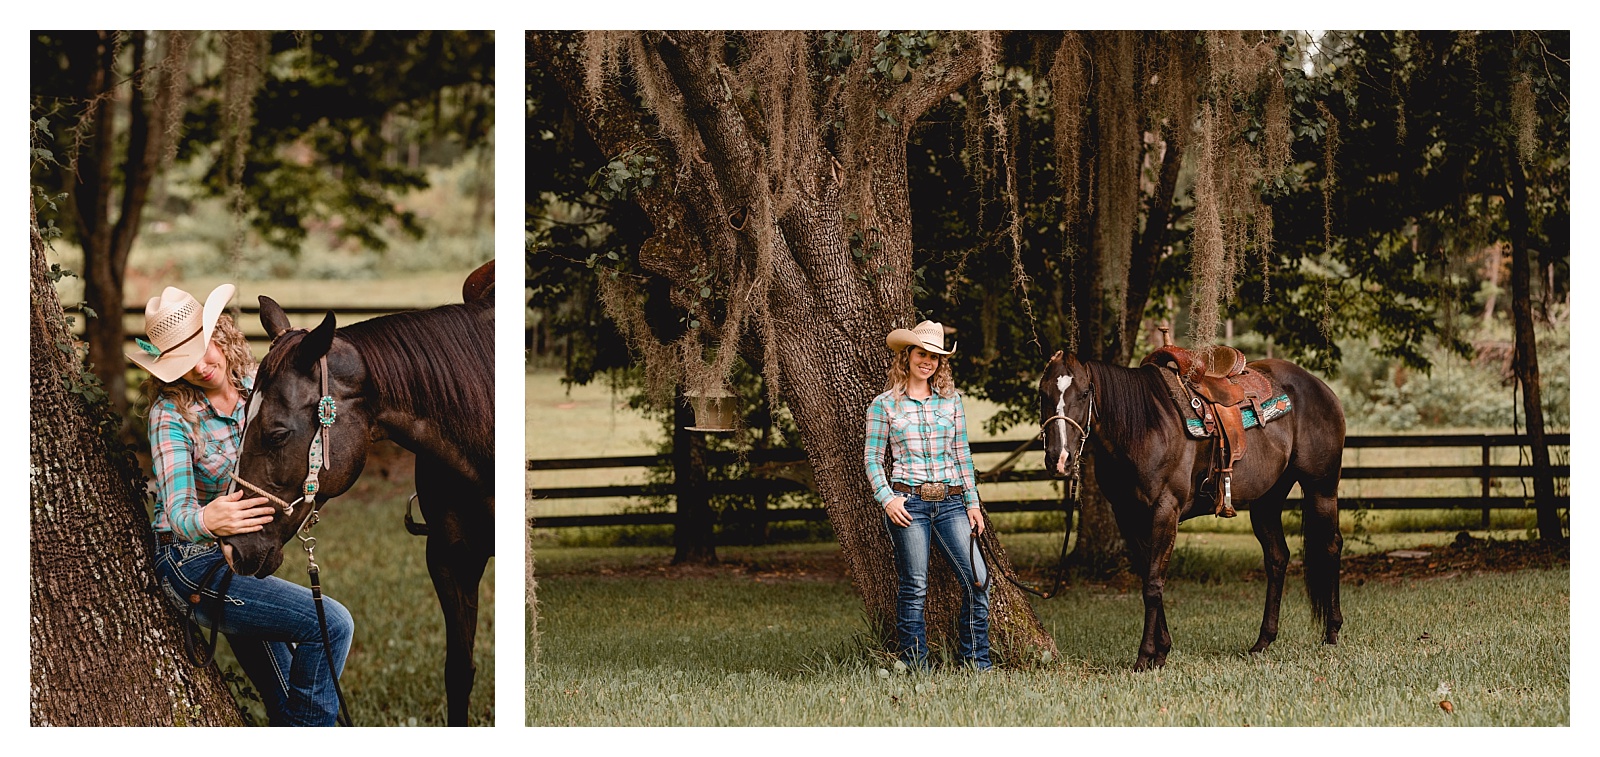 Equine photographer located in Tallahassee, FL. Natural and candid moments. Shelly Williams Photography